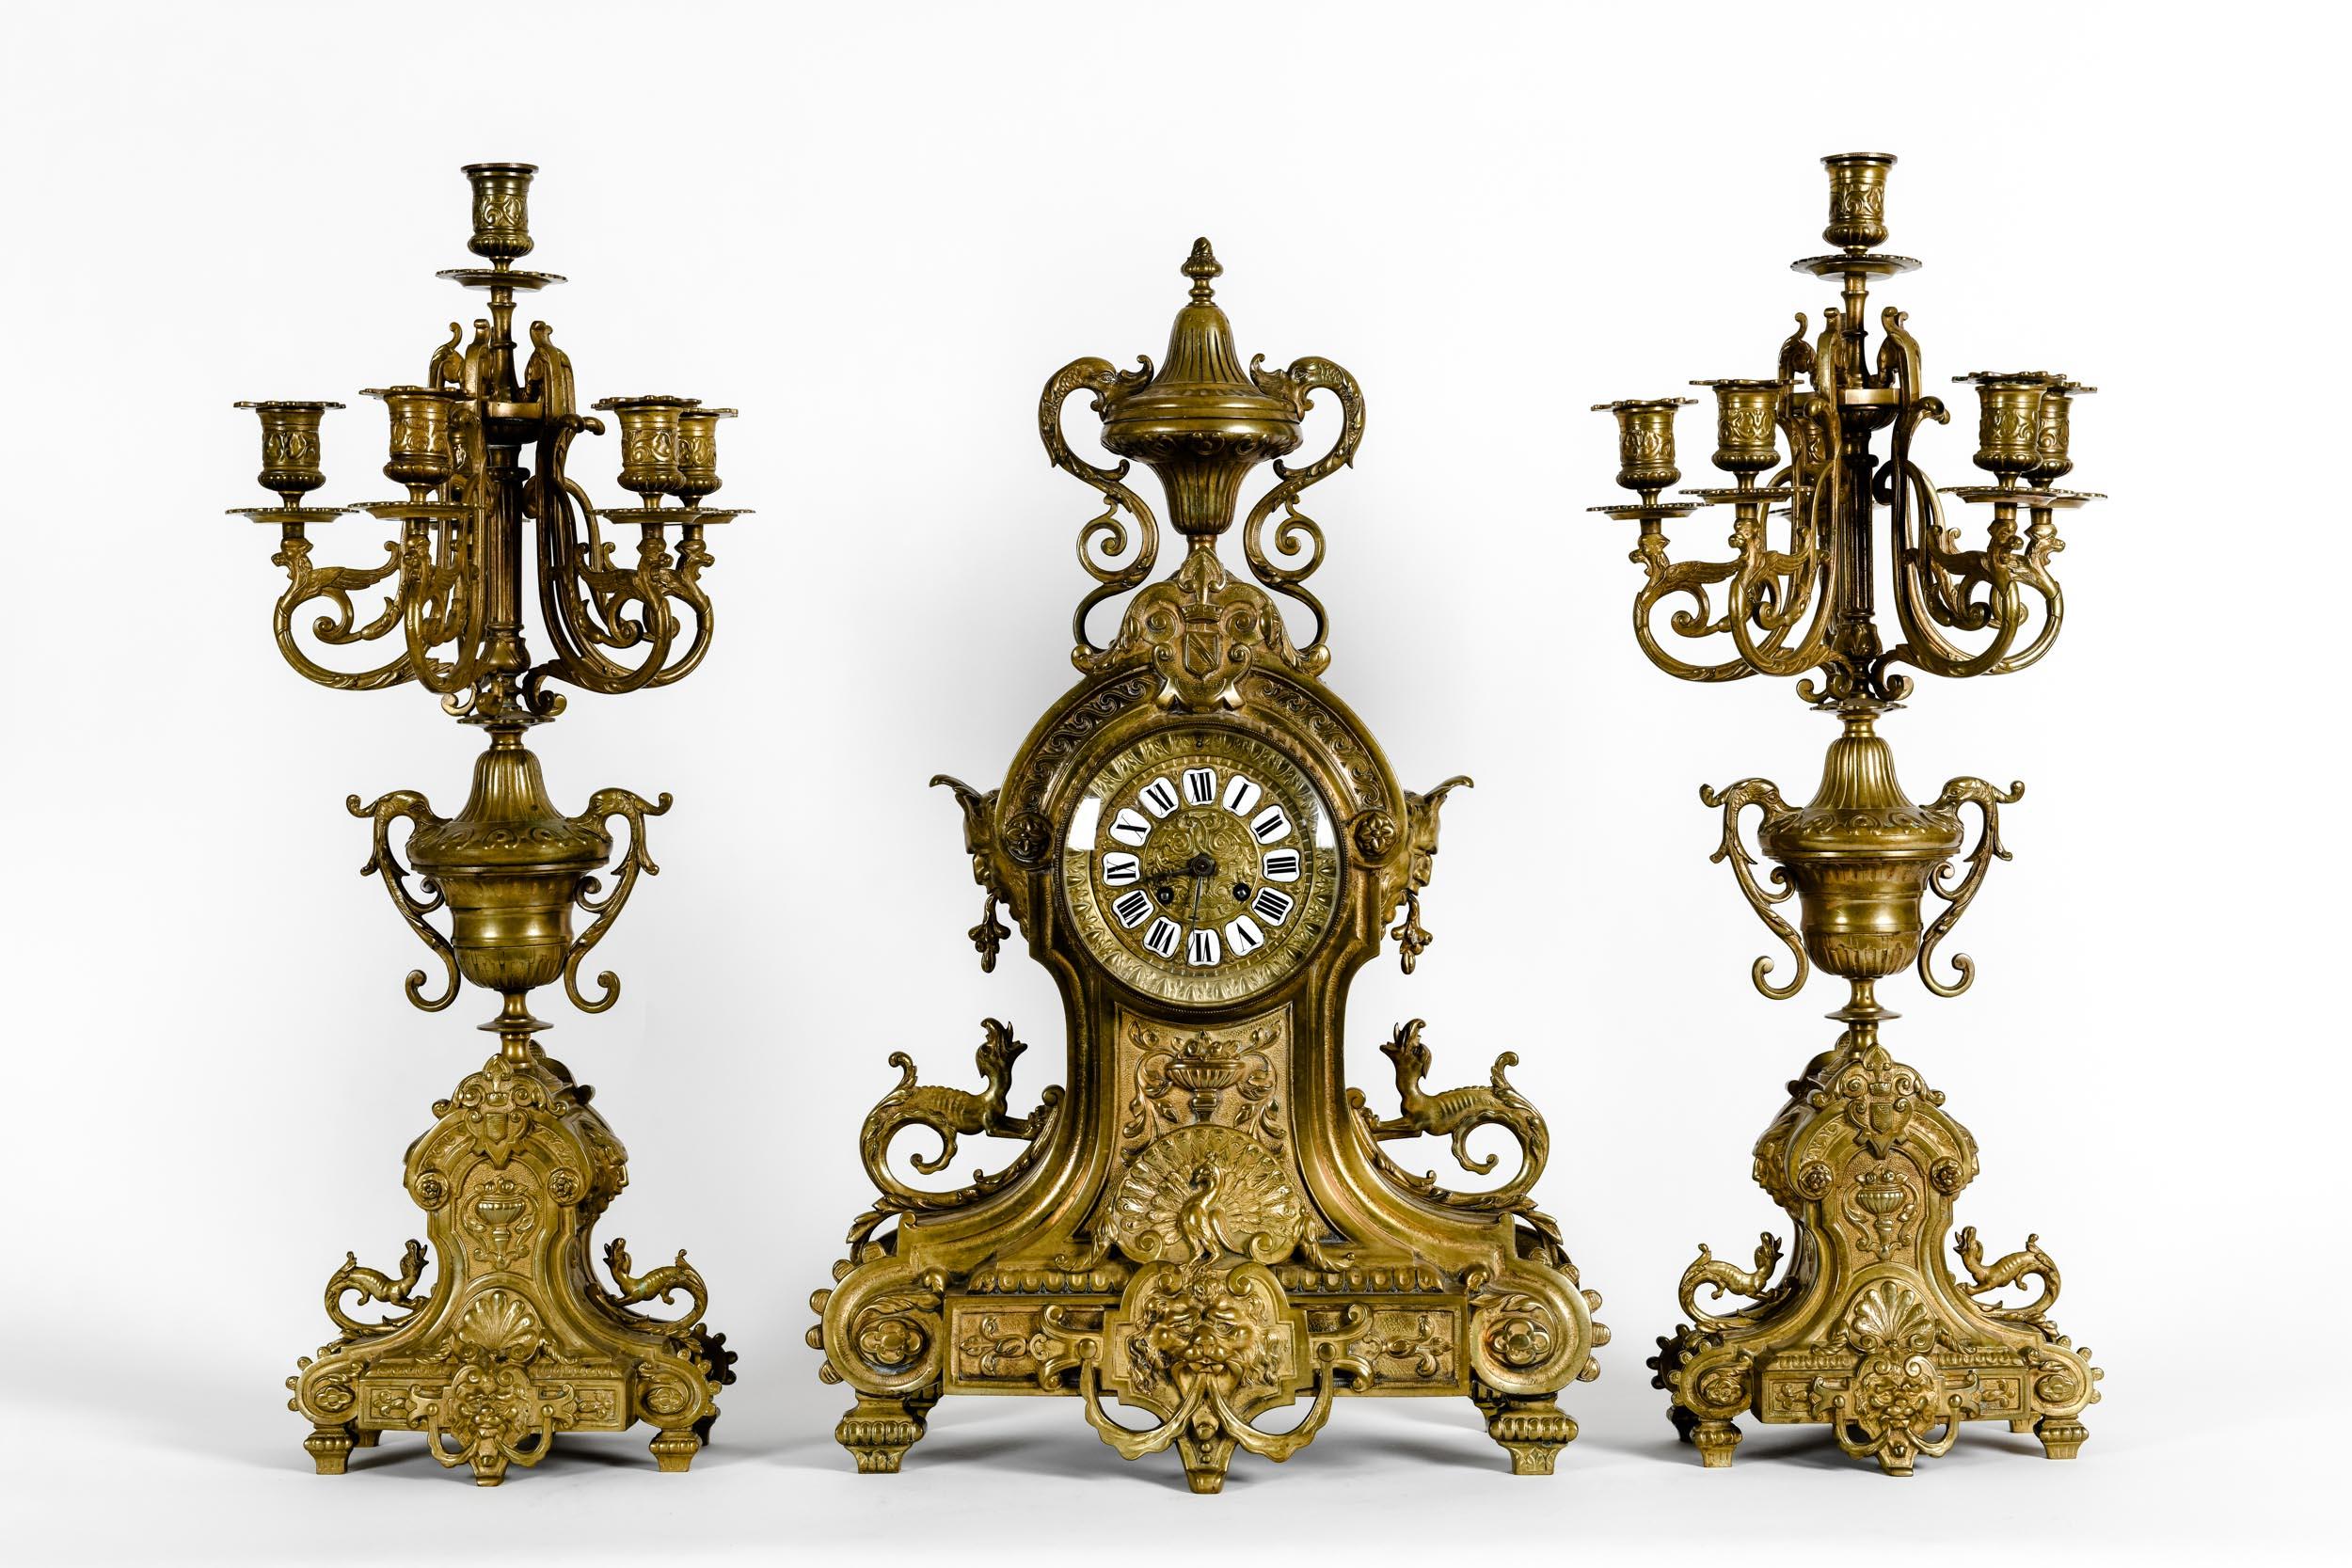 Antique English bronze renaissance revival three-piece clock garniture. The set composed of a center clock and two flanking six arms candelabra. Each piece is lavishly decorated with lion heads, winged caryatid, and serpents. Accented overall with